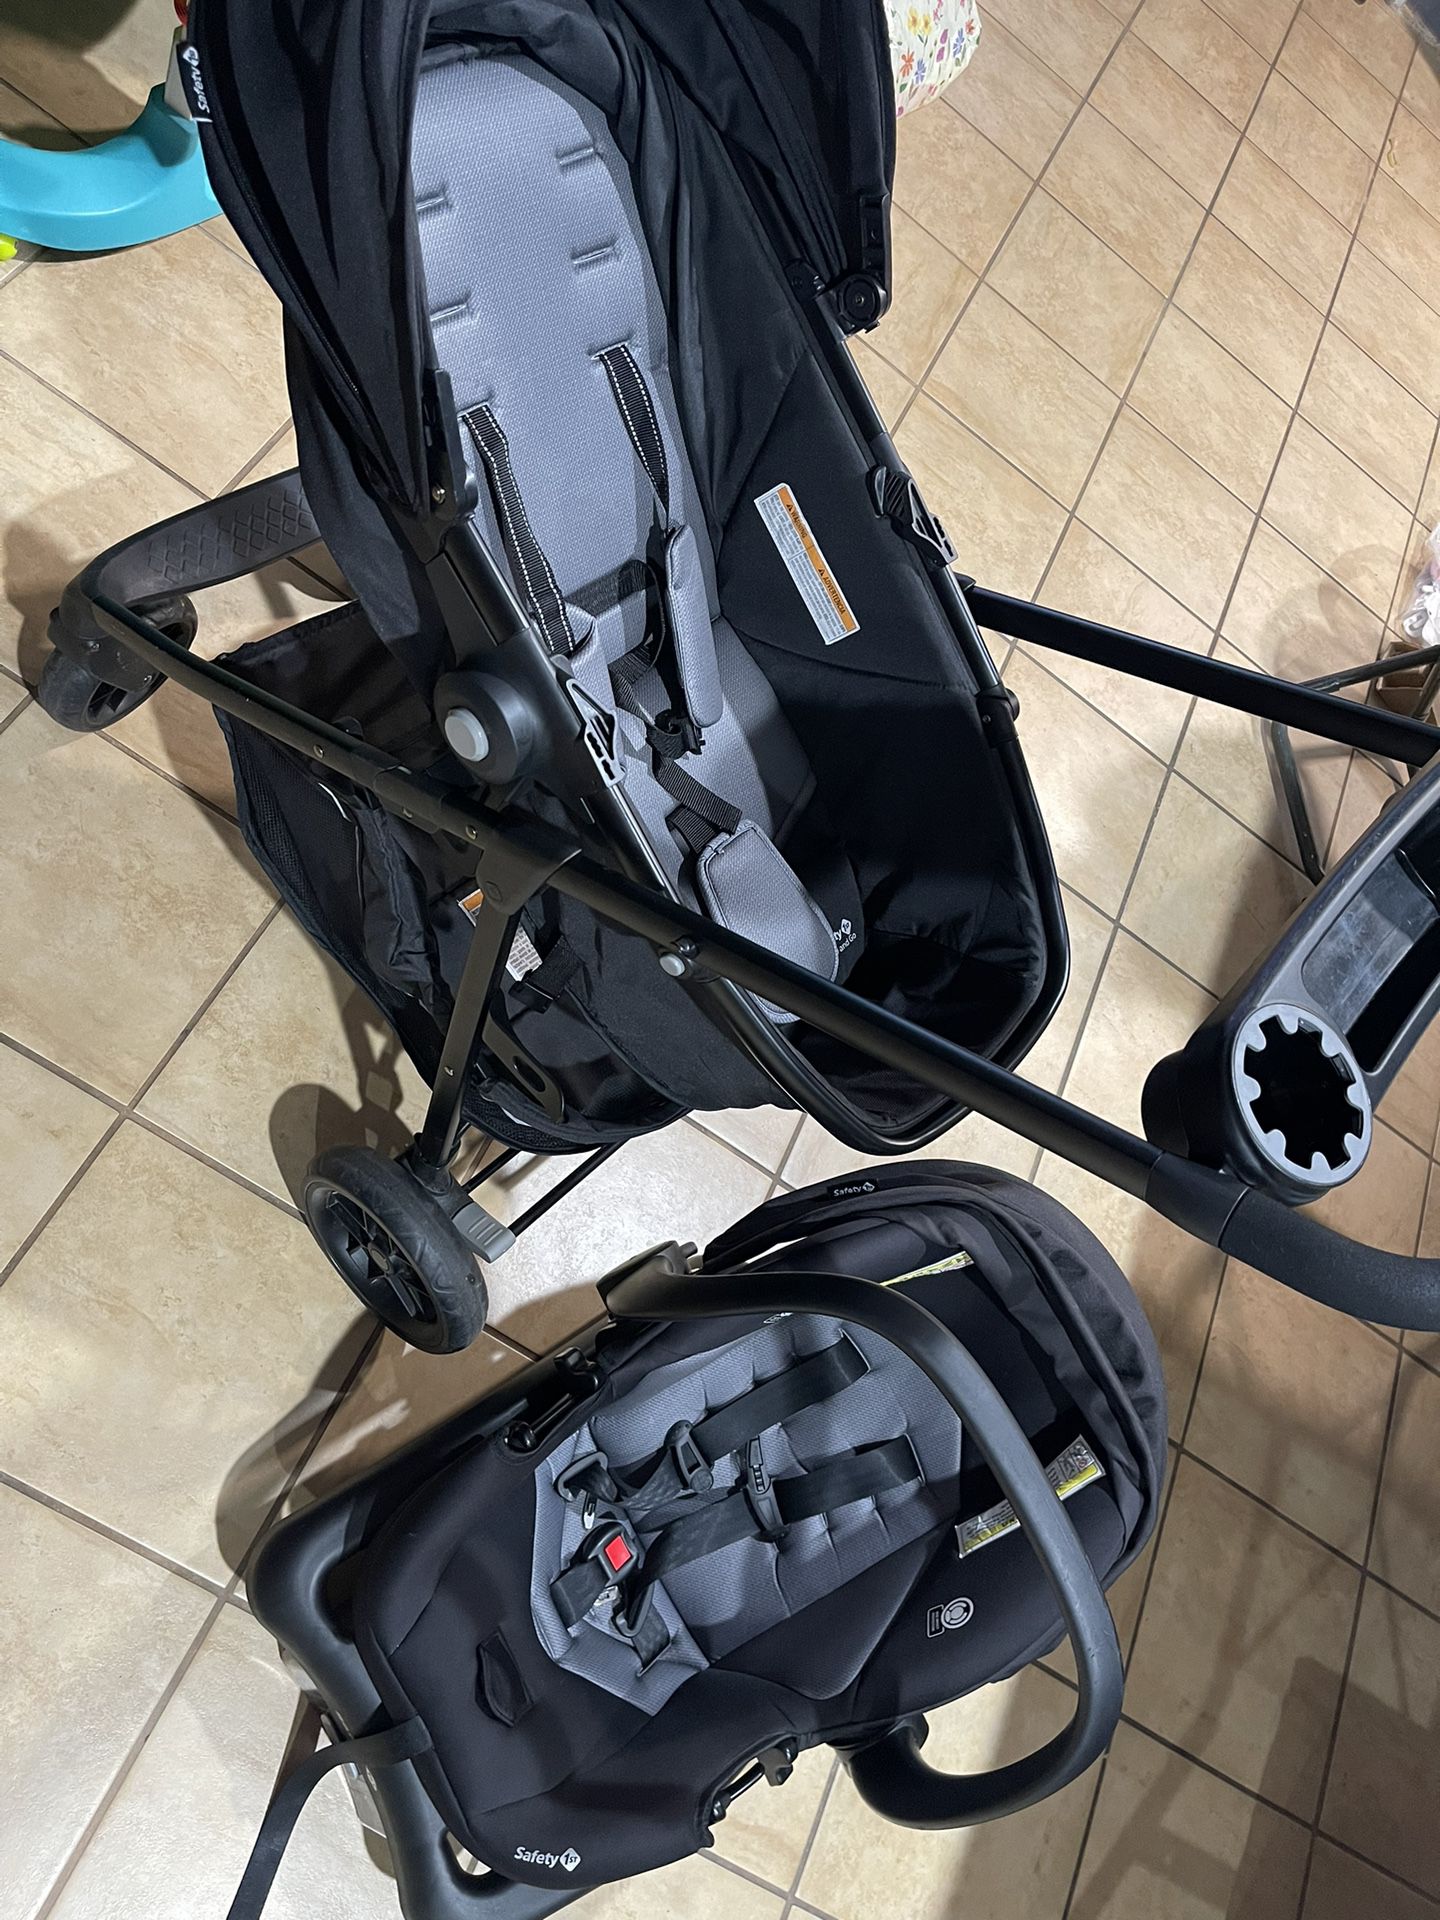 Safety First Stroller, Car Seat And Bassinet